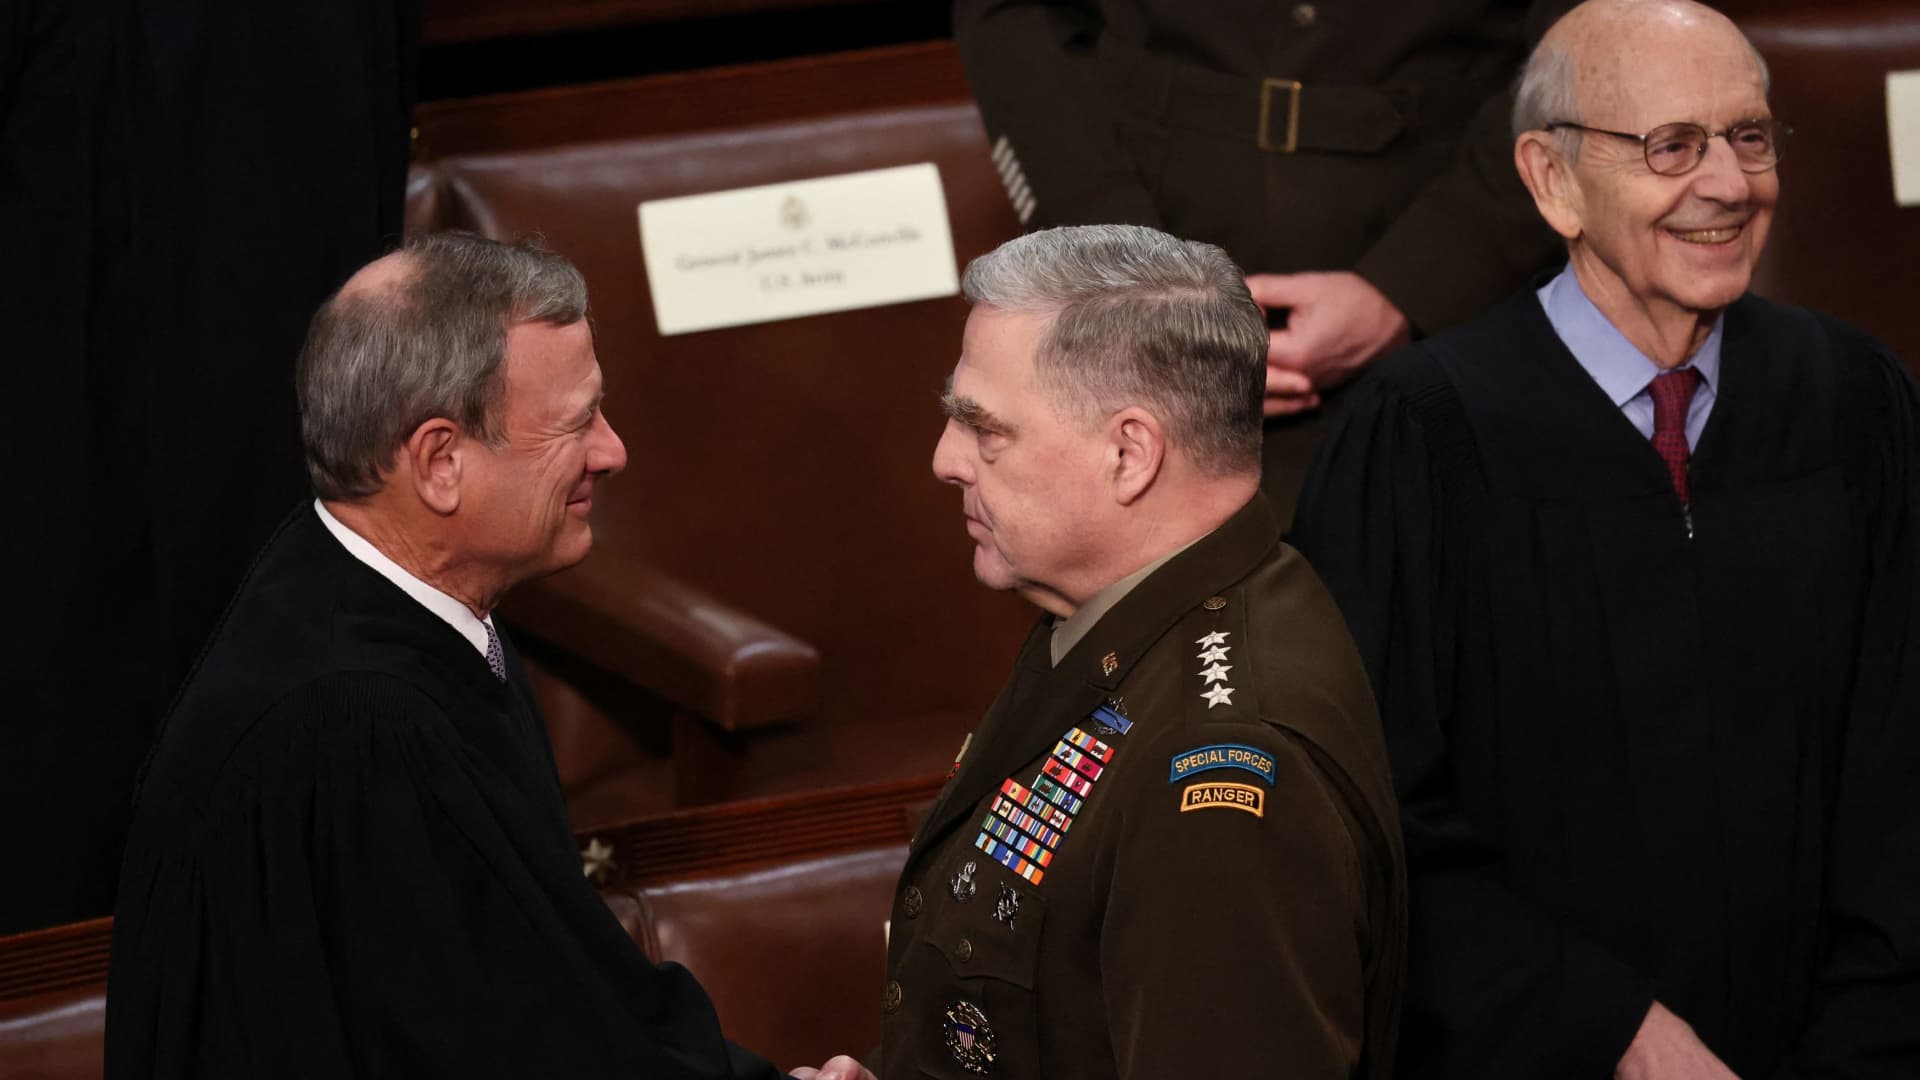 U.S. Supreme Court Chief Justice John Roberts greets Chairman of the Joint Chiefs of Staff General Mark Milley as he arrives to attend President Joe Biden's State of the Union address to a joint session of the U.S. Congress and Associate Justice Stephen Breyer looks on in the House of Representatives Chamber at the Capitol in Washington, U.S. March 1, 2022.